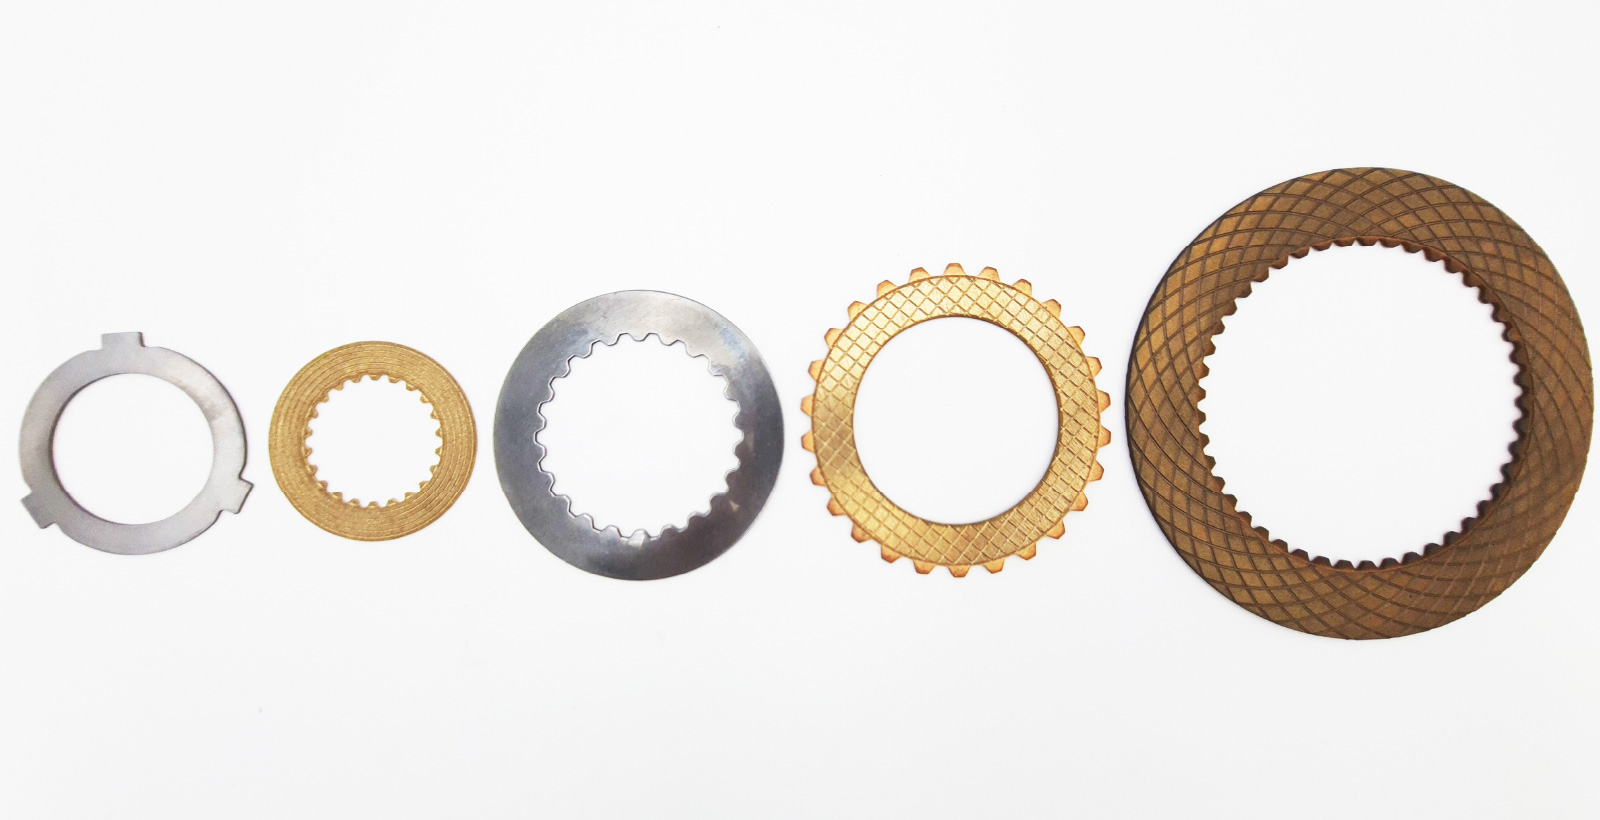 Bronze Transmission Discs for Paper and Pulp Industry